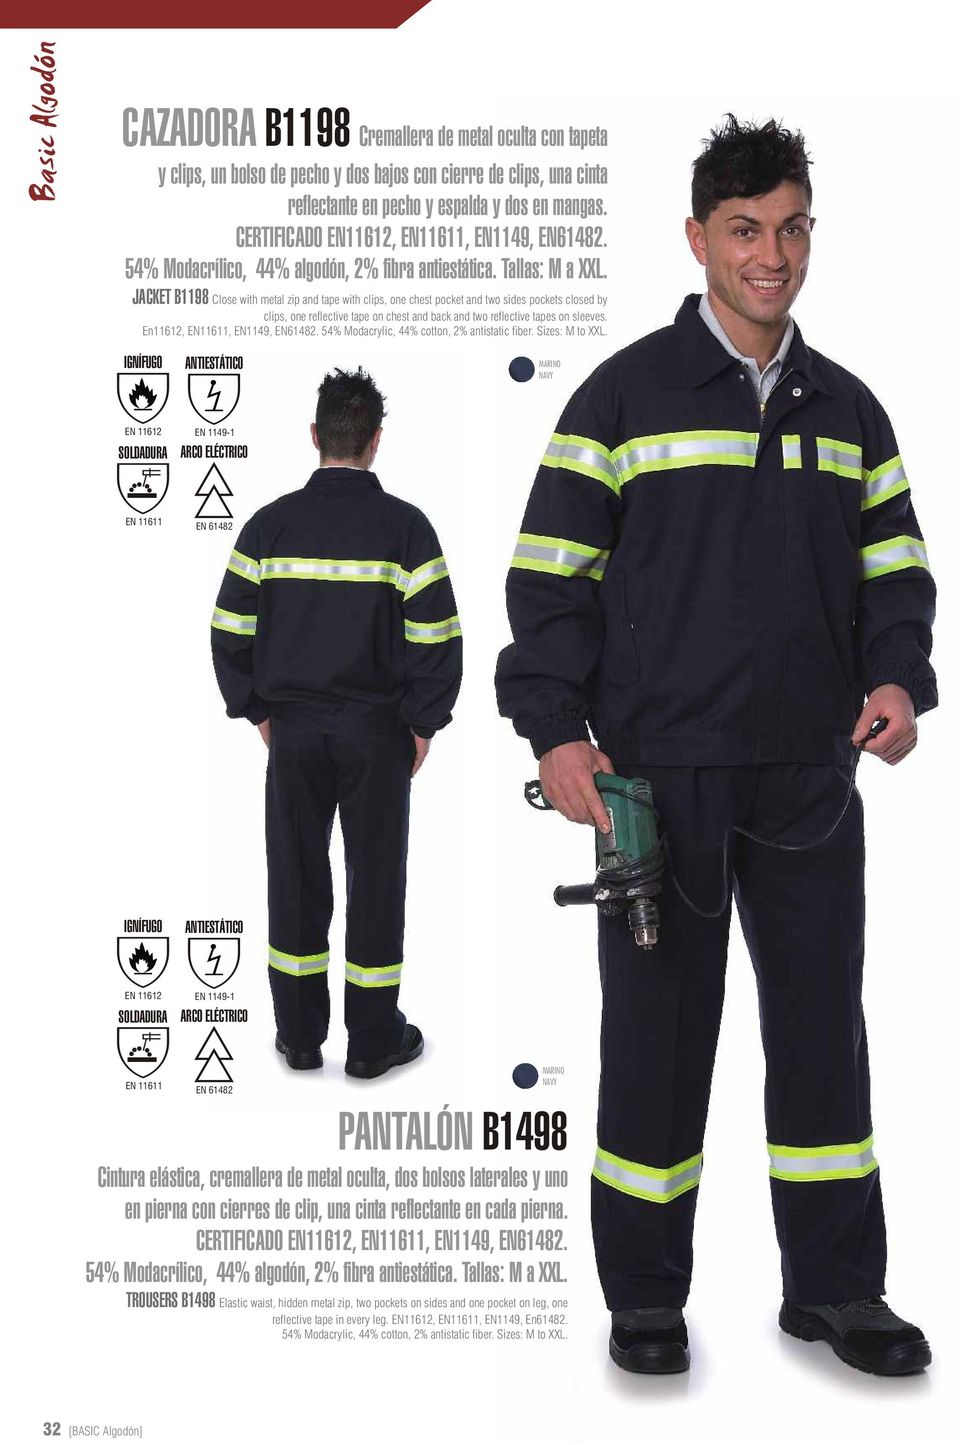 JACKET B1198 Close with metal zip and tape with clips, one chest pocket and two sides pockets closed by clips, one reflective tape on chest and back and two reflective tapes on sleeves.